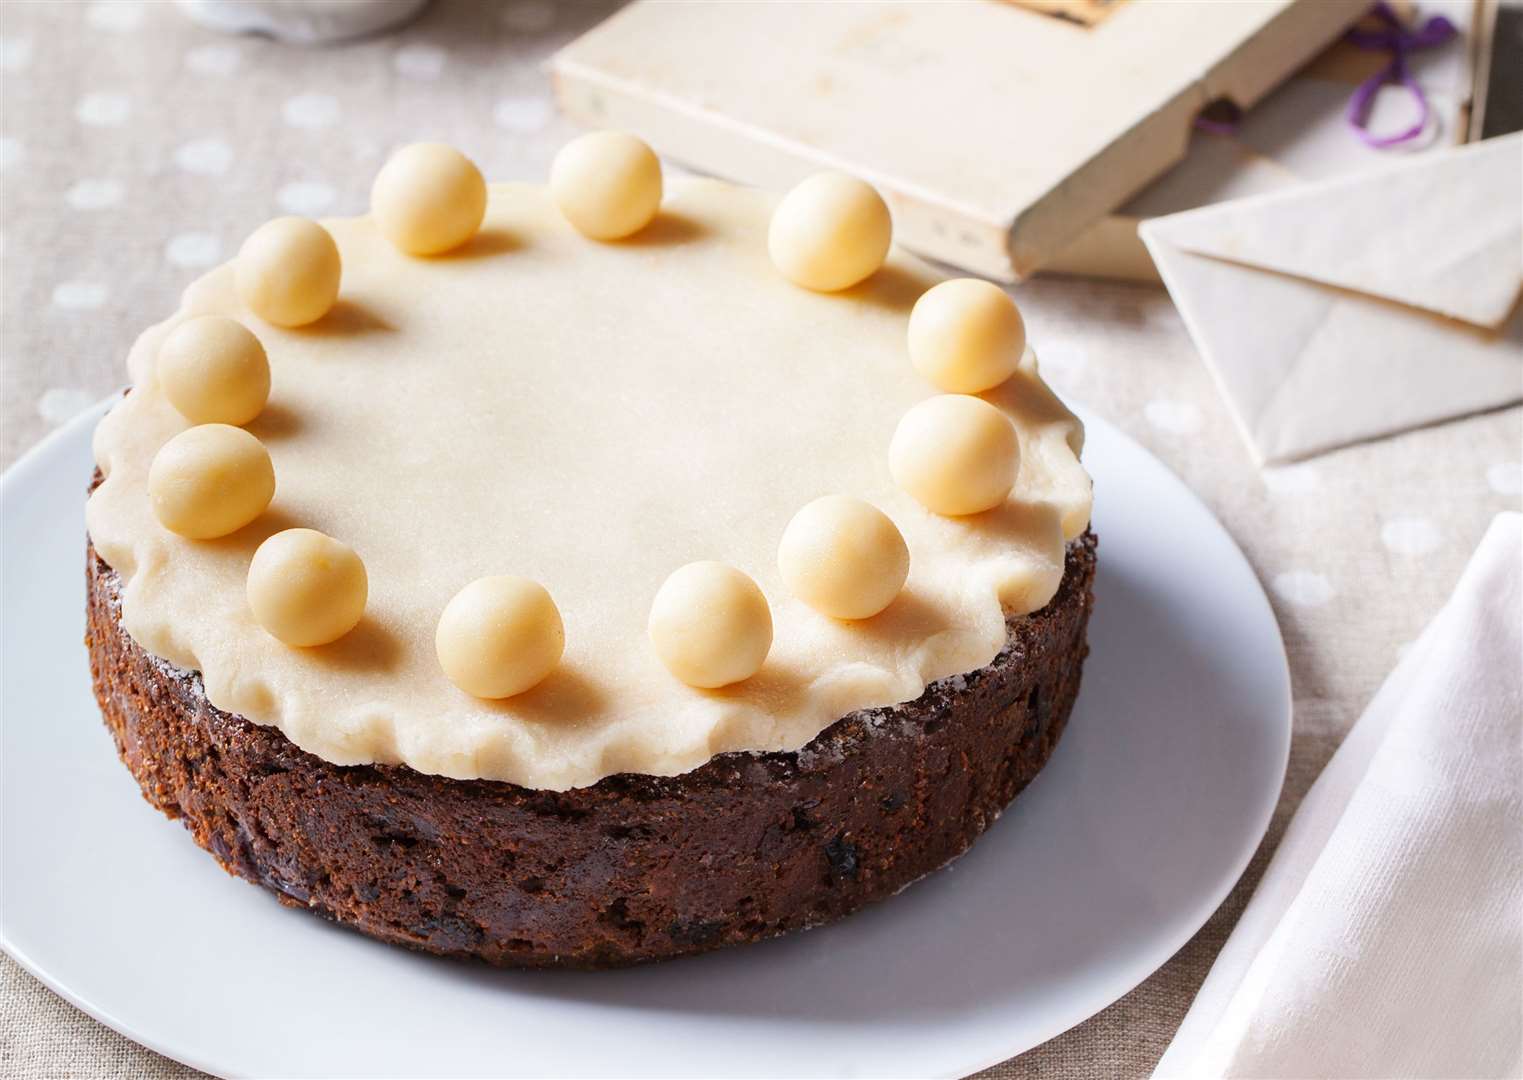 Simnel cake is a traditional Easter bake. Picture: iStock/PA